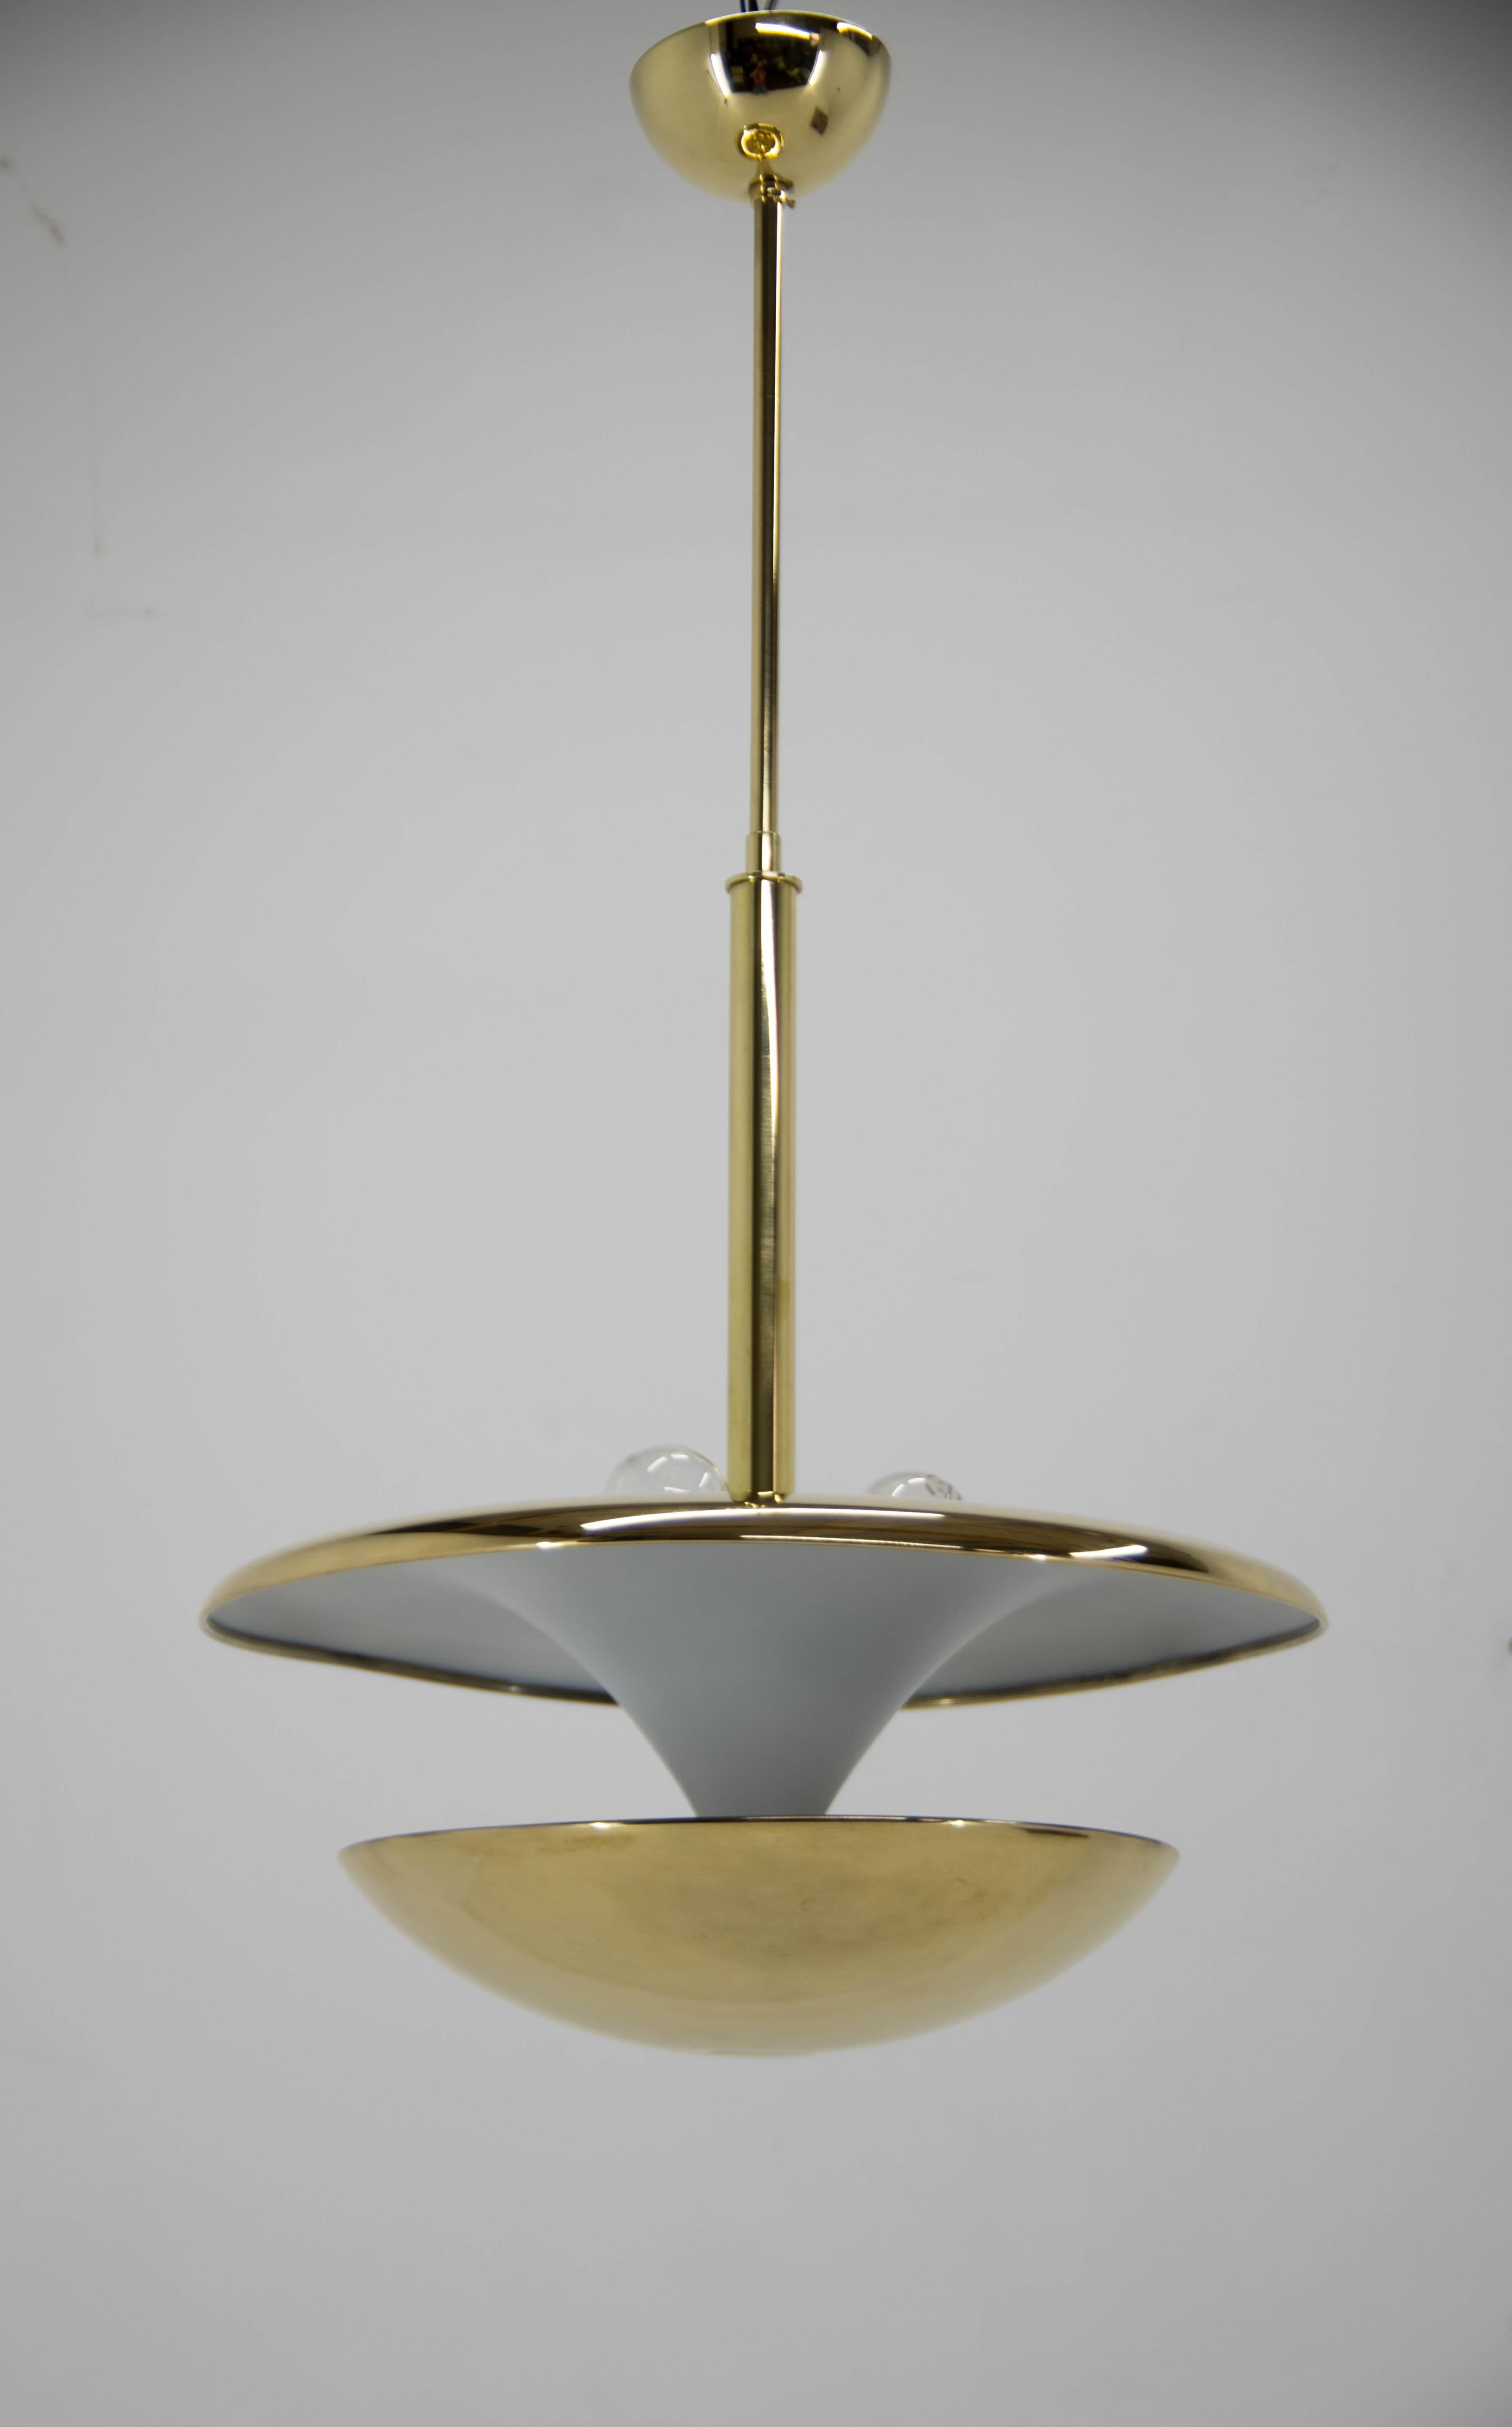 Very rare Bauhaus chandelier executed in polished brass designed by Frantisek Anyz in 1920s and produced by his company IAS. Upper and lower bulbs could be switched separately to produce different kinds of lighting. Very elegant! Very rare! Central